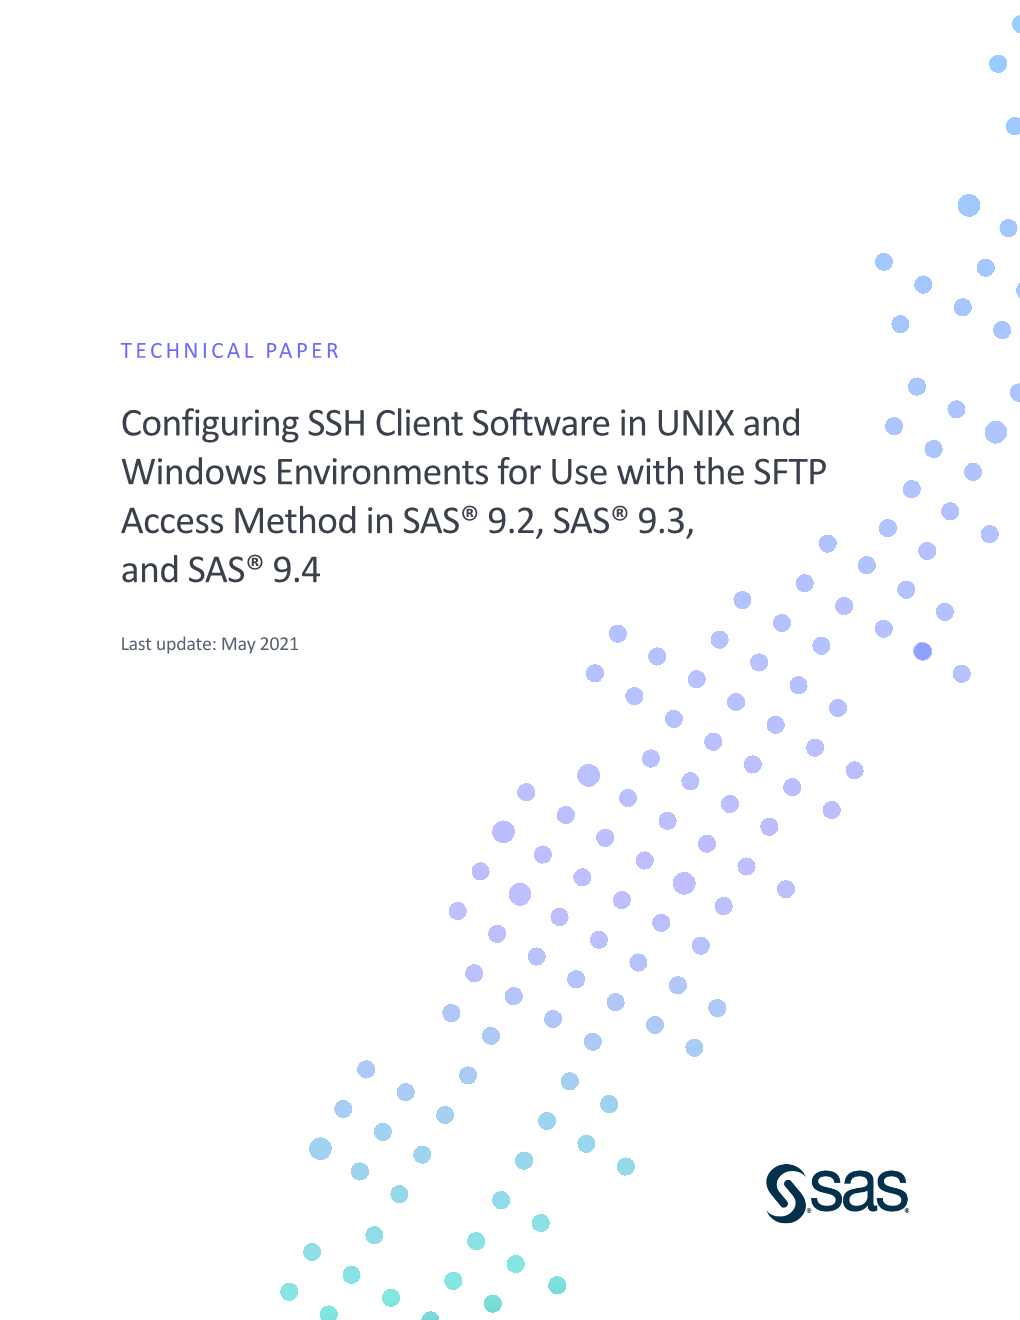 Configuring SSH Client Software in UNIX and Windows Environments for Use with the SFTP Access Method in SAS® 9.2, SAS® 9.3, and SAS® 9.4